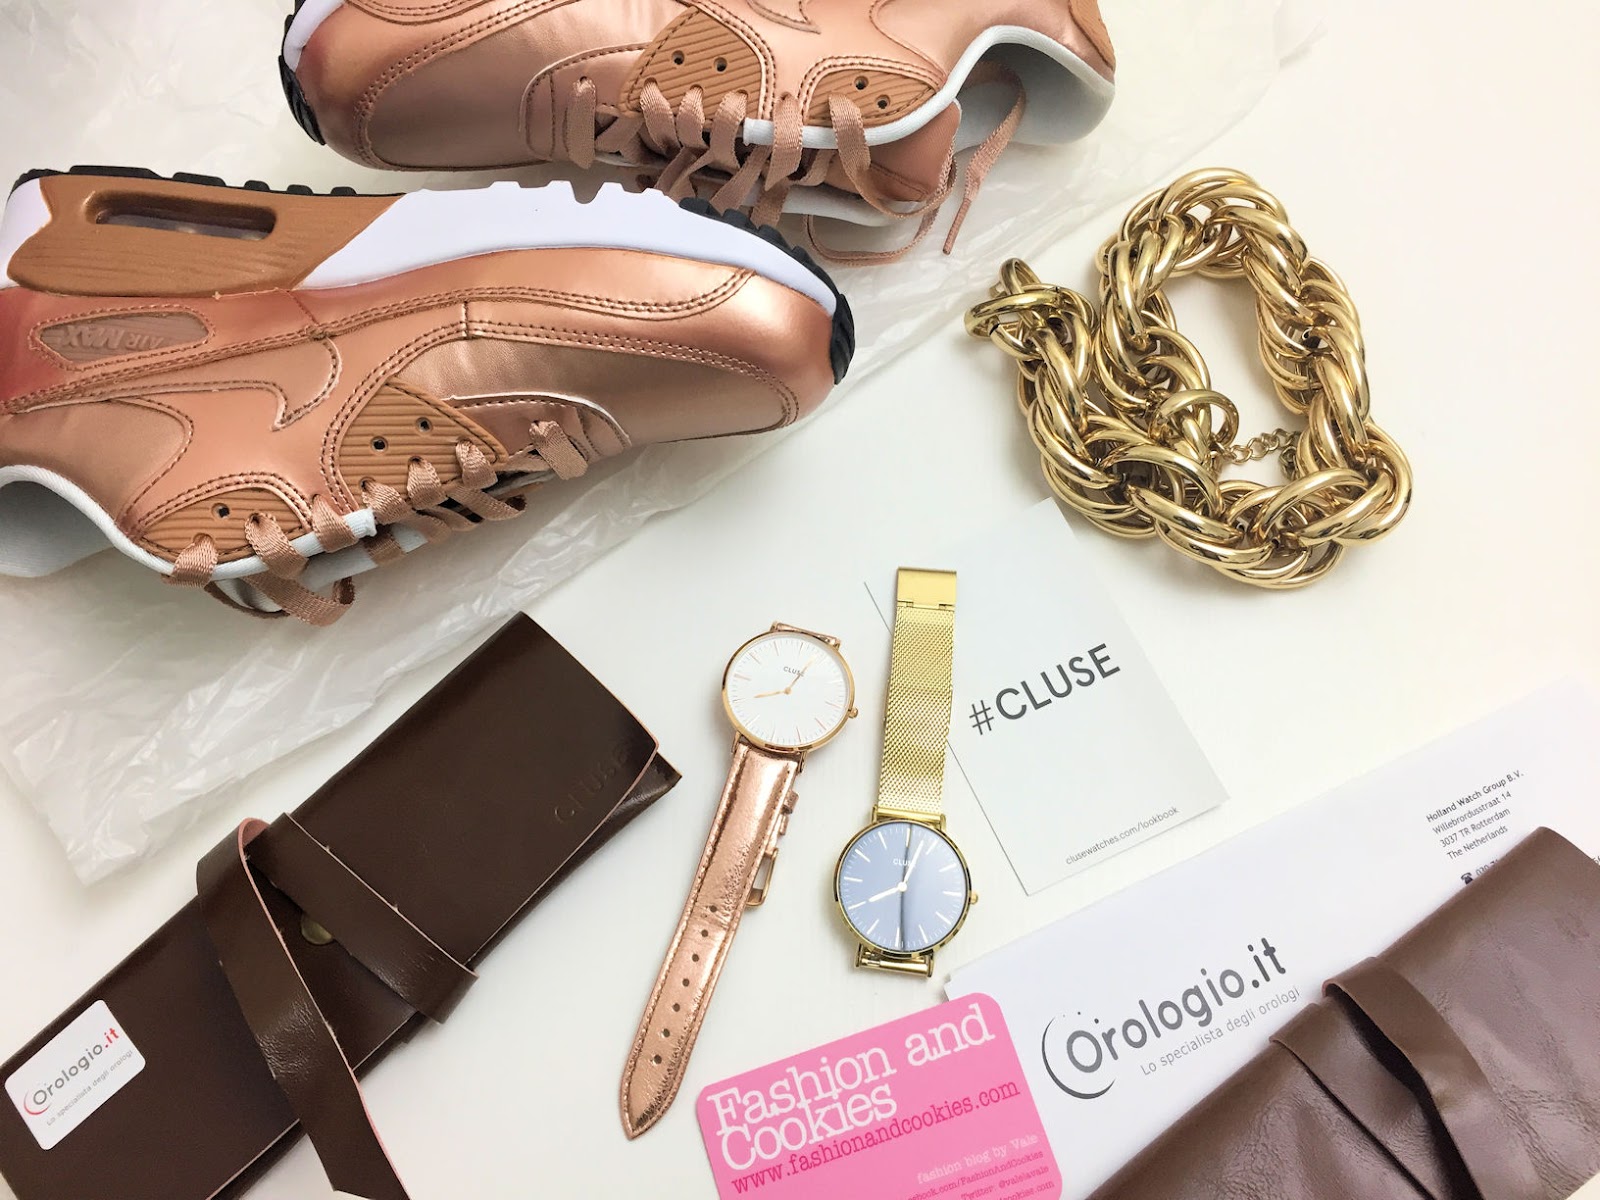 Rose gold watch on Orologio.it on Fashion and Cookies fashion blog, fashion blogger